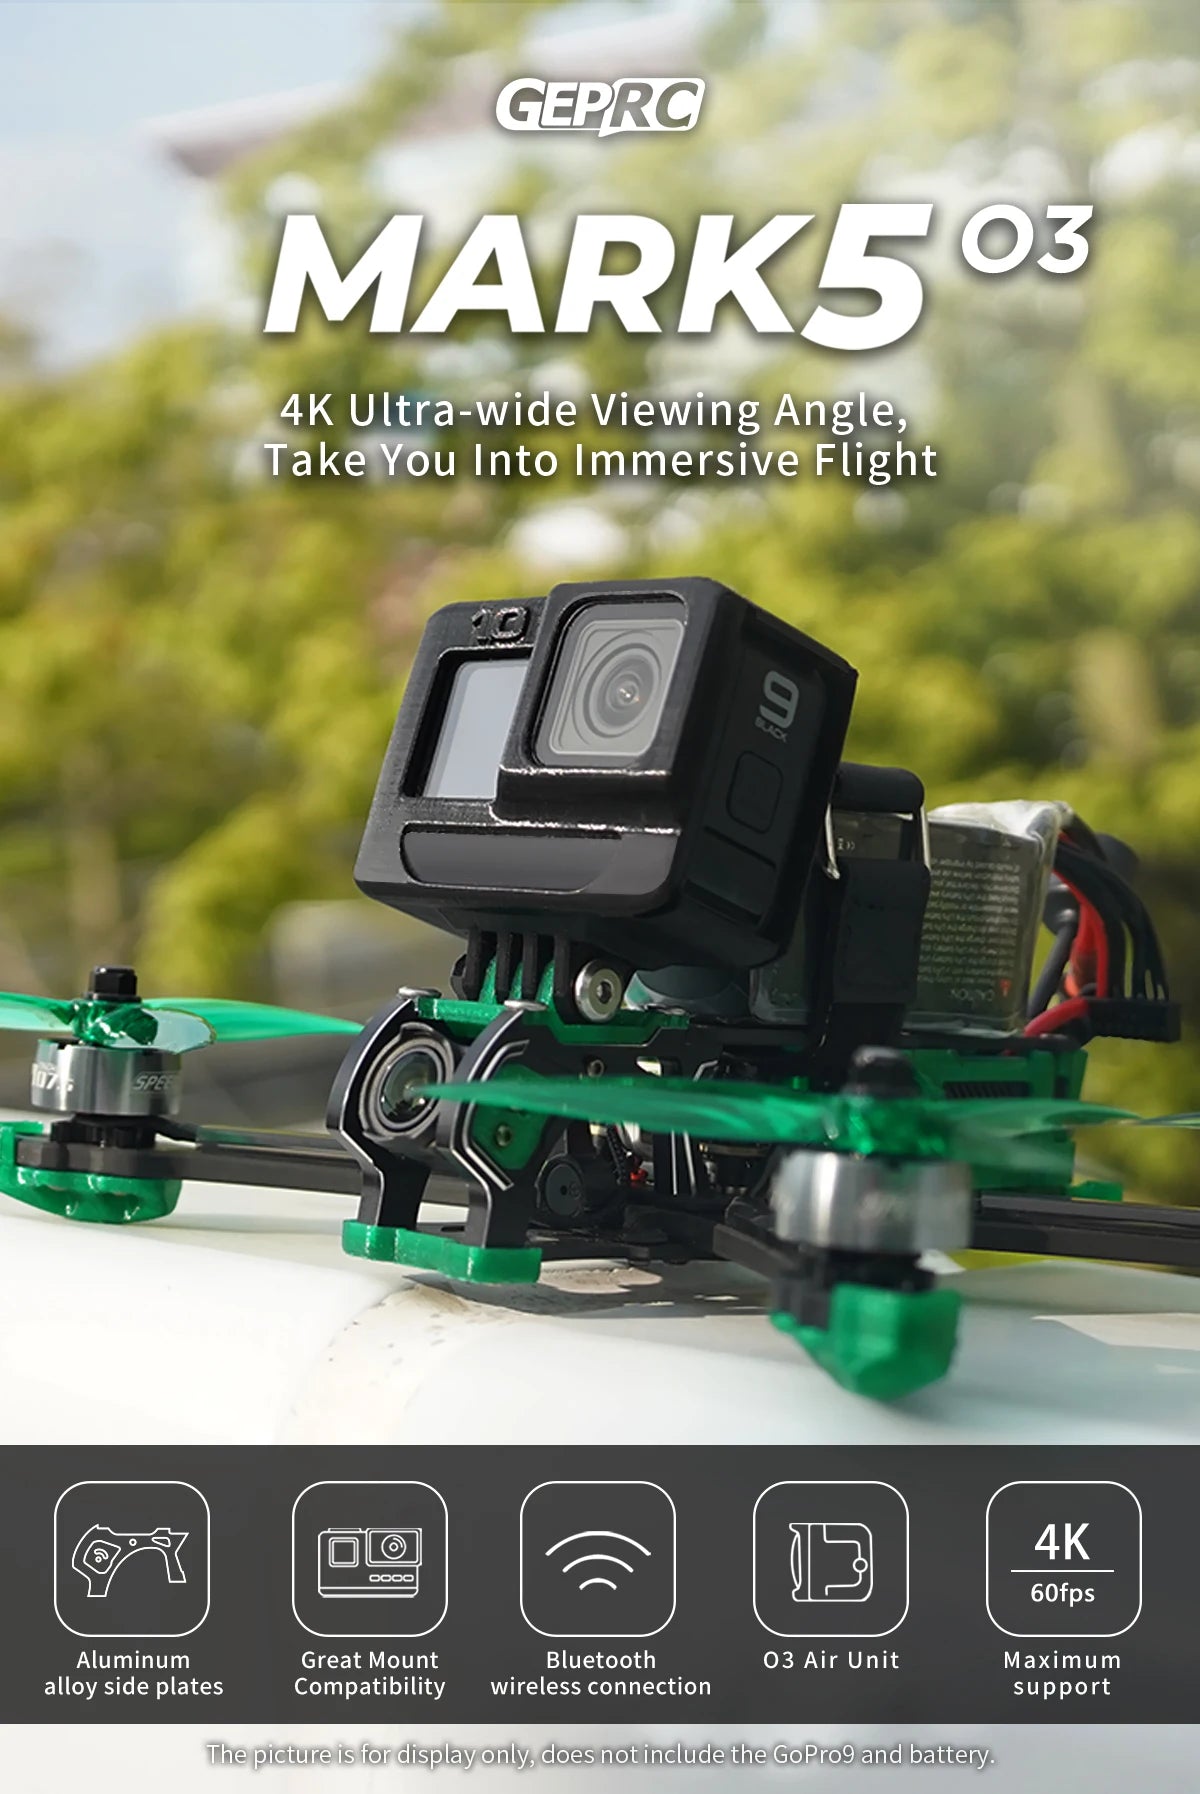 GEPRC New MARK5 HD O3 Freestyle FPV Drone, GEPRC MARK503 4K Ultra-wide Viewing Angle; Take You 